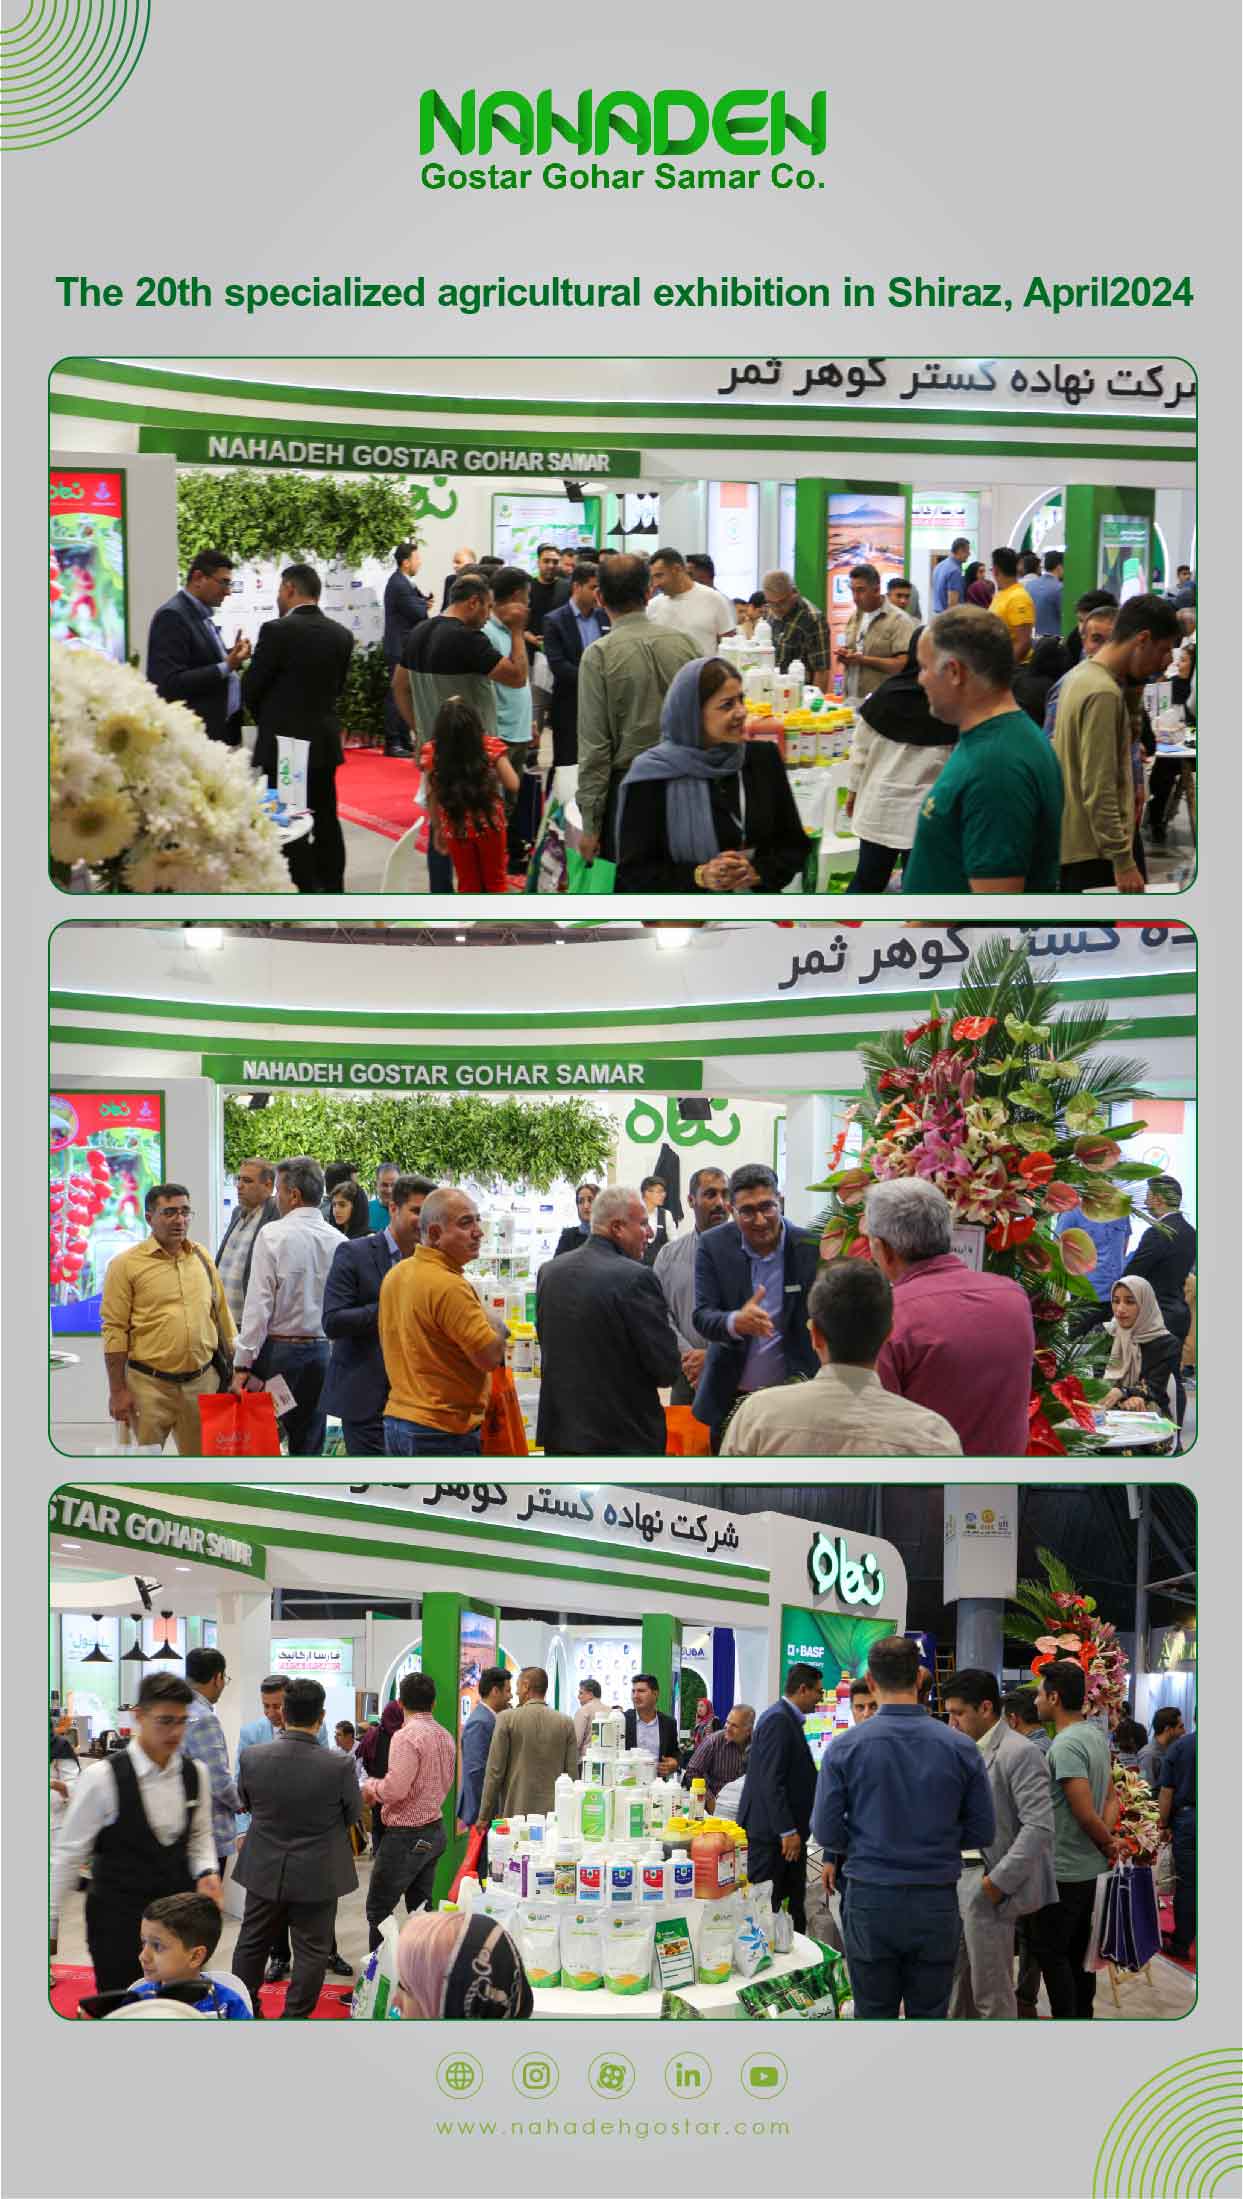 The 20th specialized agricultural exhibition in Shiraz , April 2024